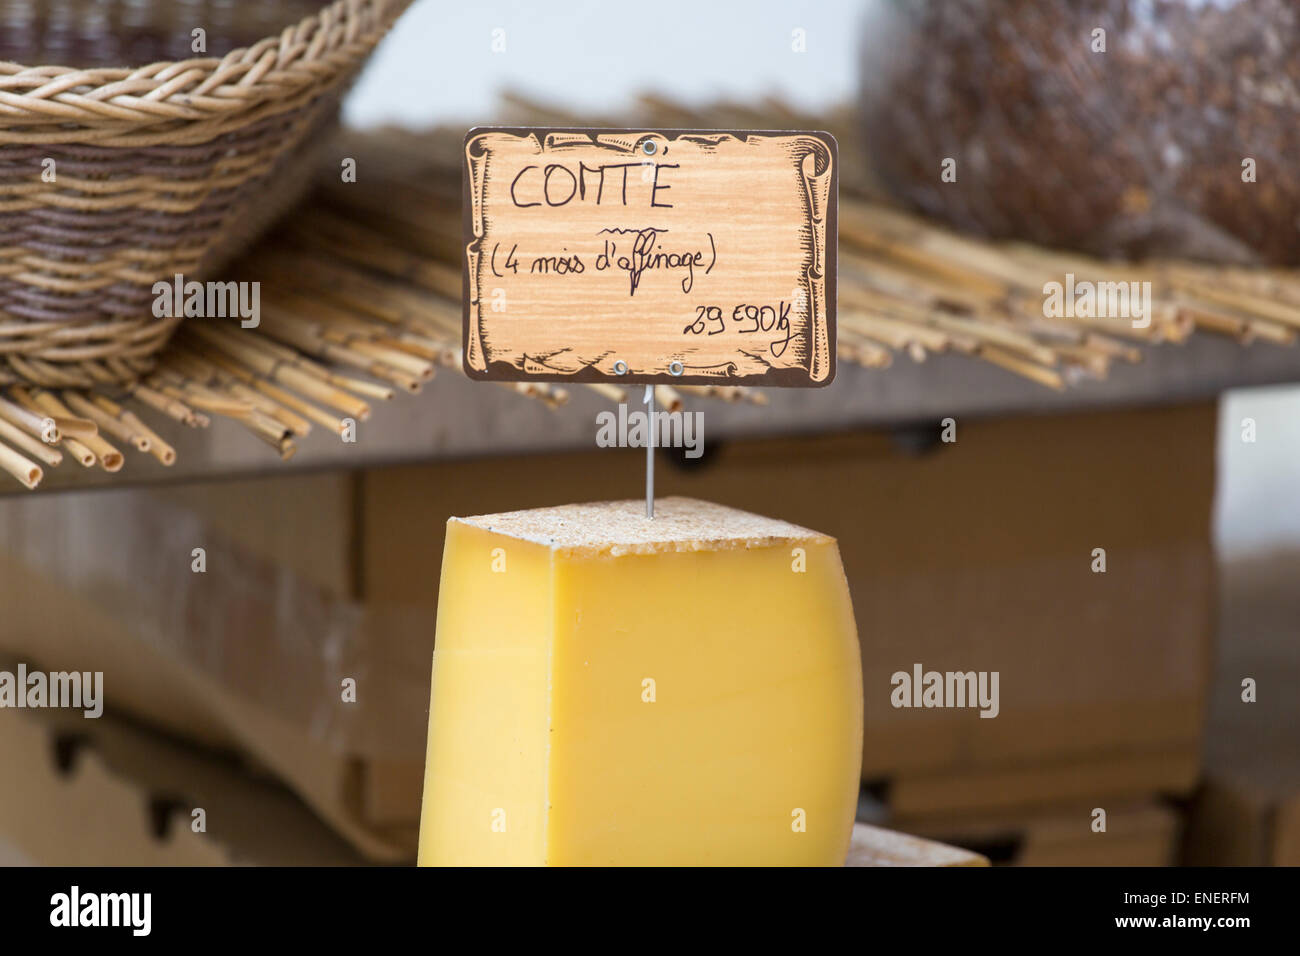 Comté cheese at the sunday market of Montcuq with local food products in France Stock Photo